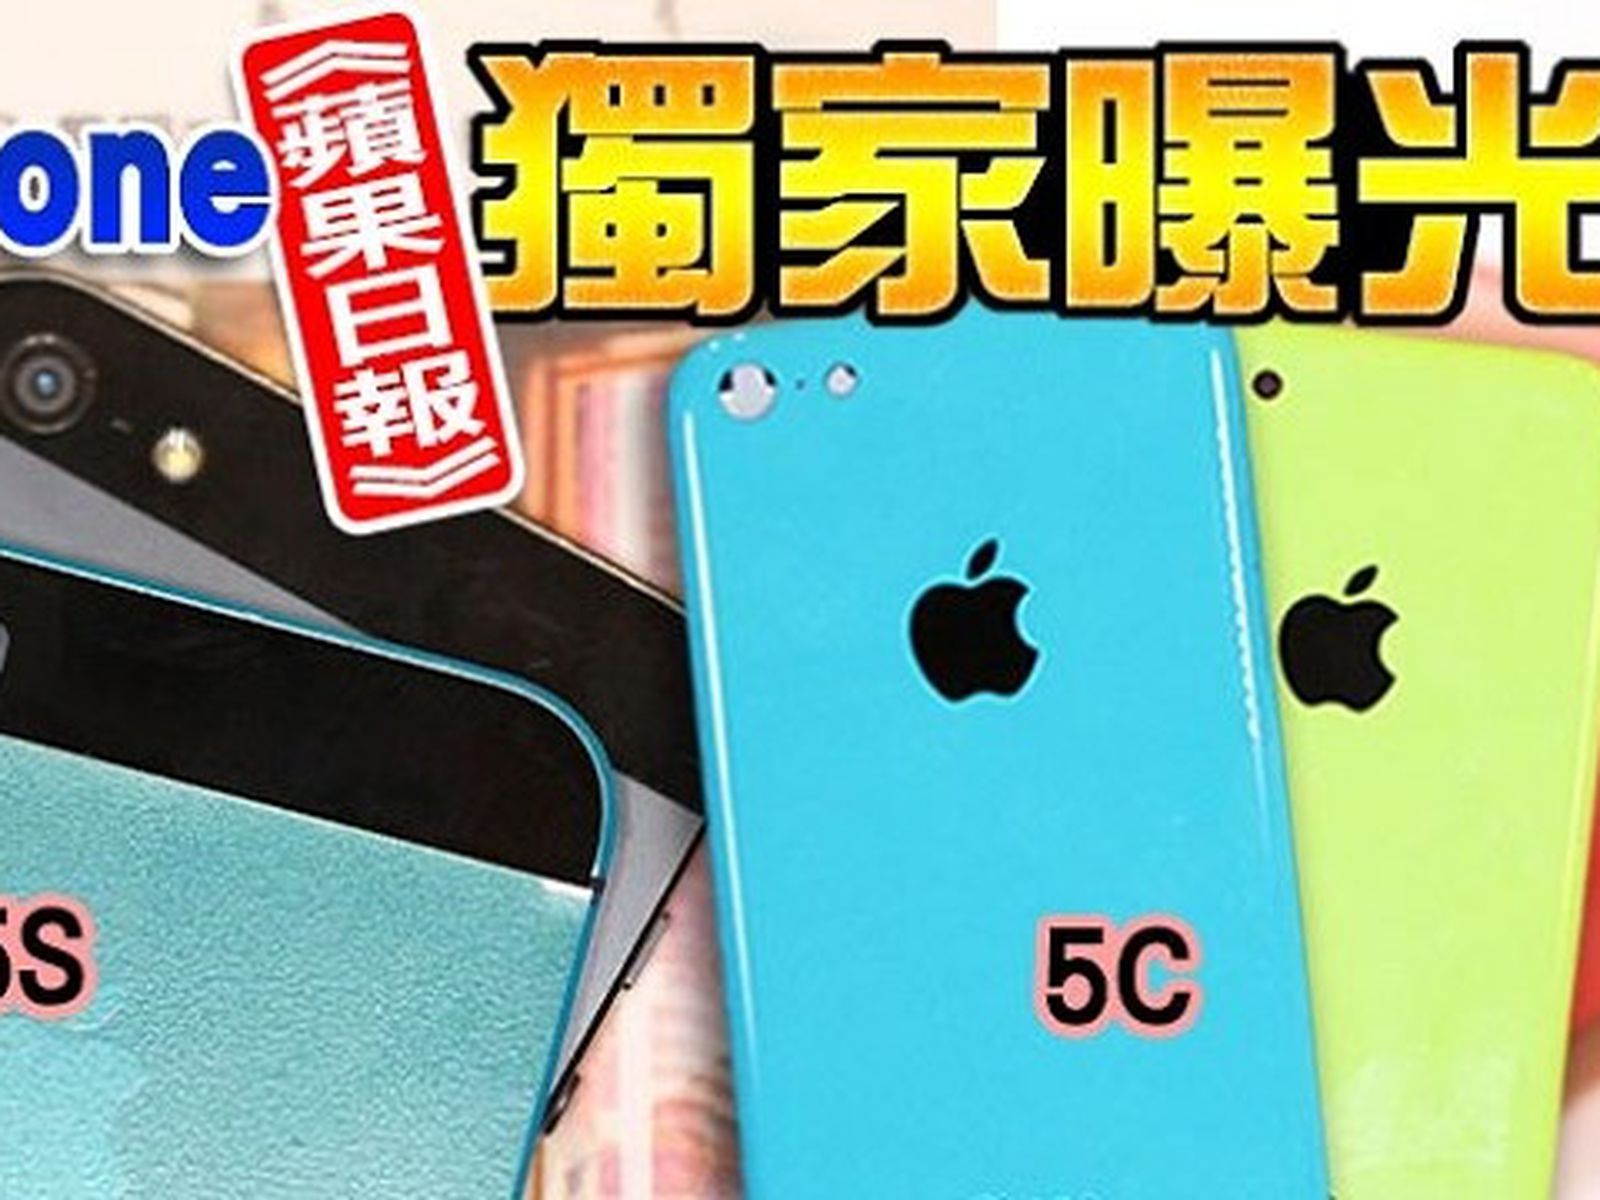 Iphone 5c Rear Shell Subjected To Scratch Tests Caliper Measurements Macrumors